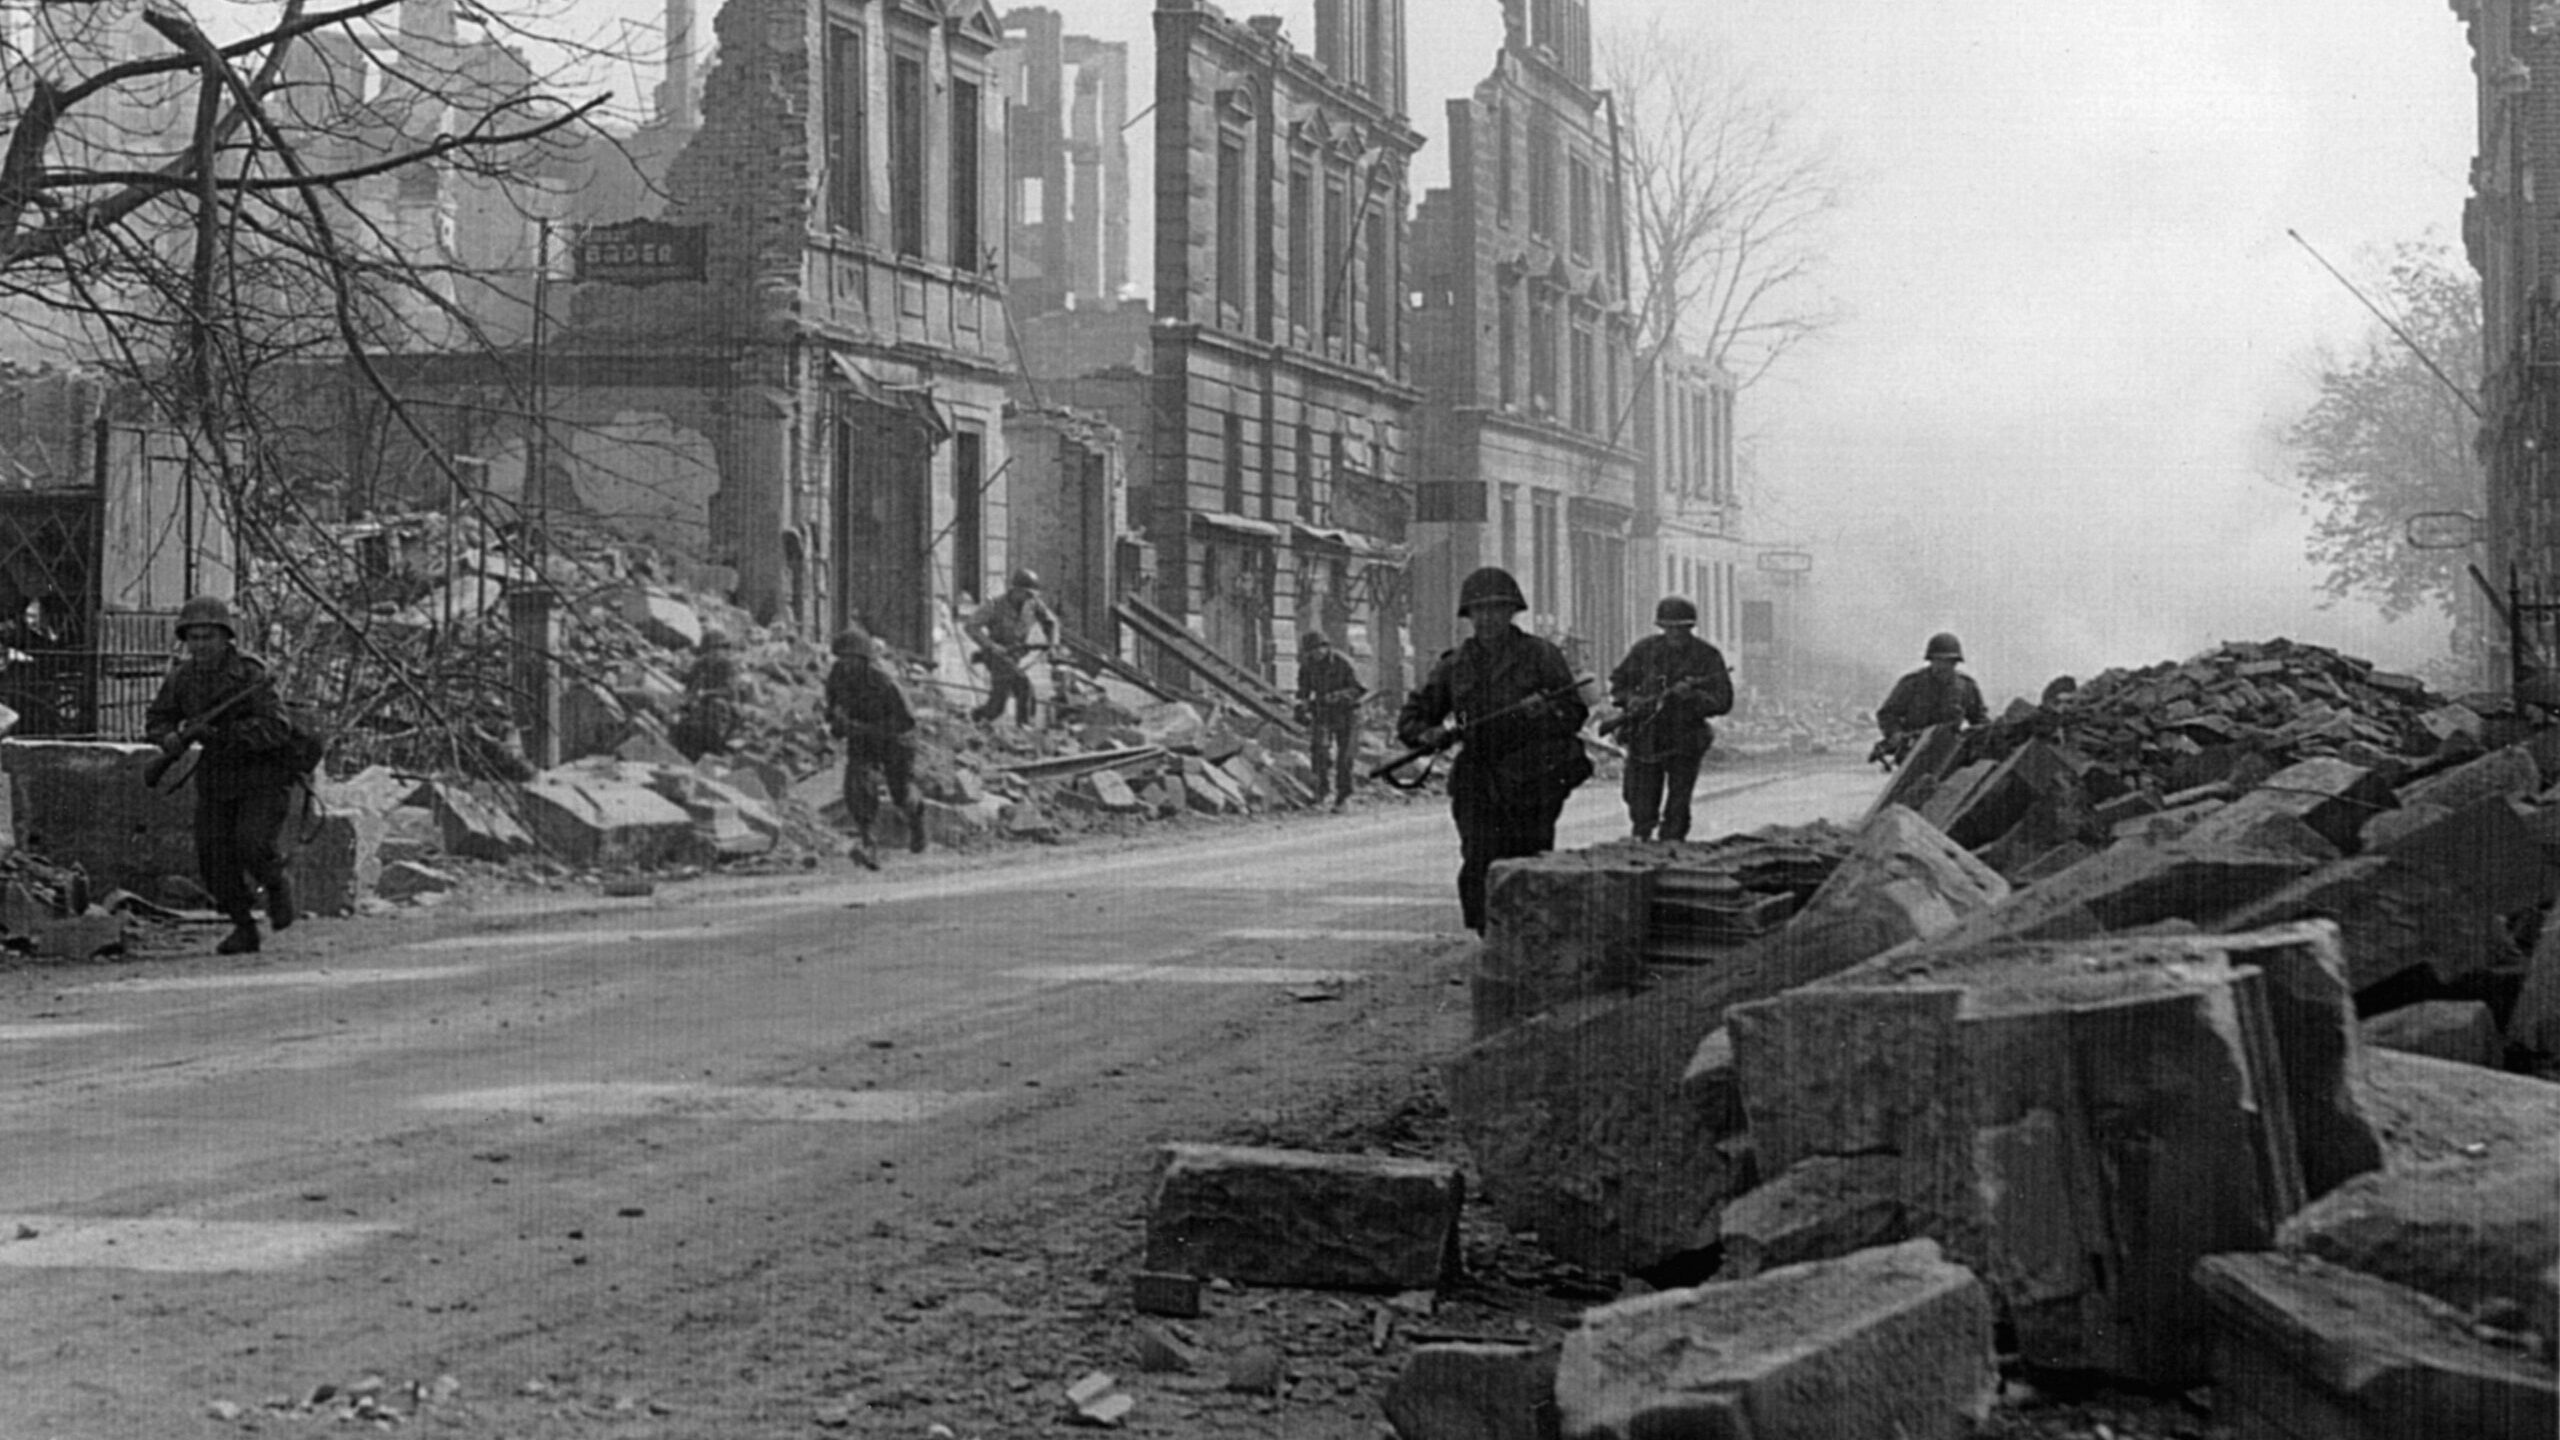 Soldiers of the 399th Infantry Regiment move quickly past the bombed-out shells of buildings in the German city of Heilbronn during the last days of major combat in the European Theater.